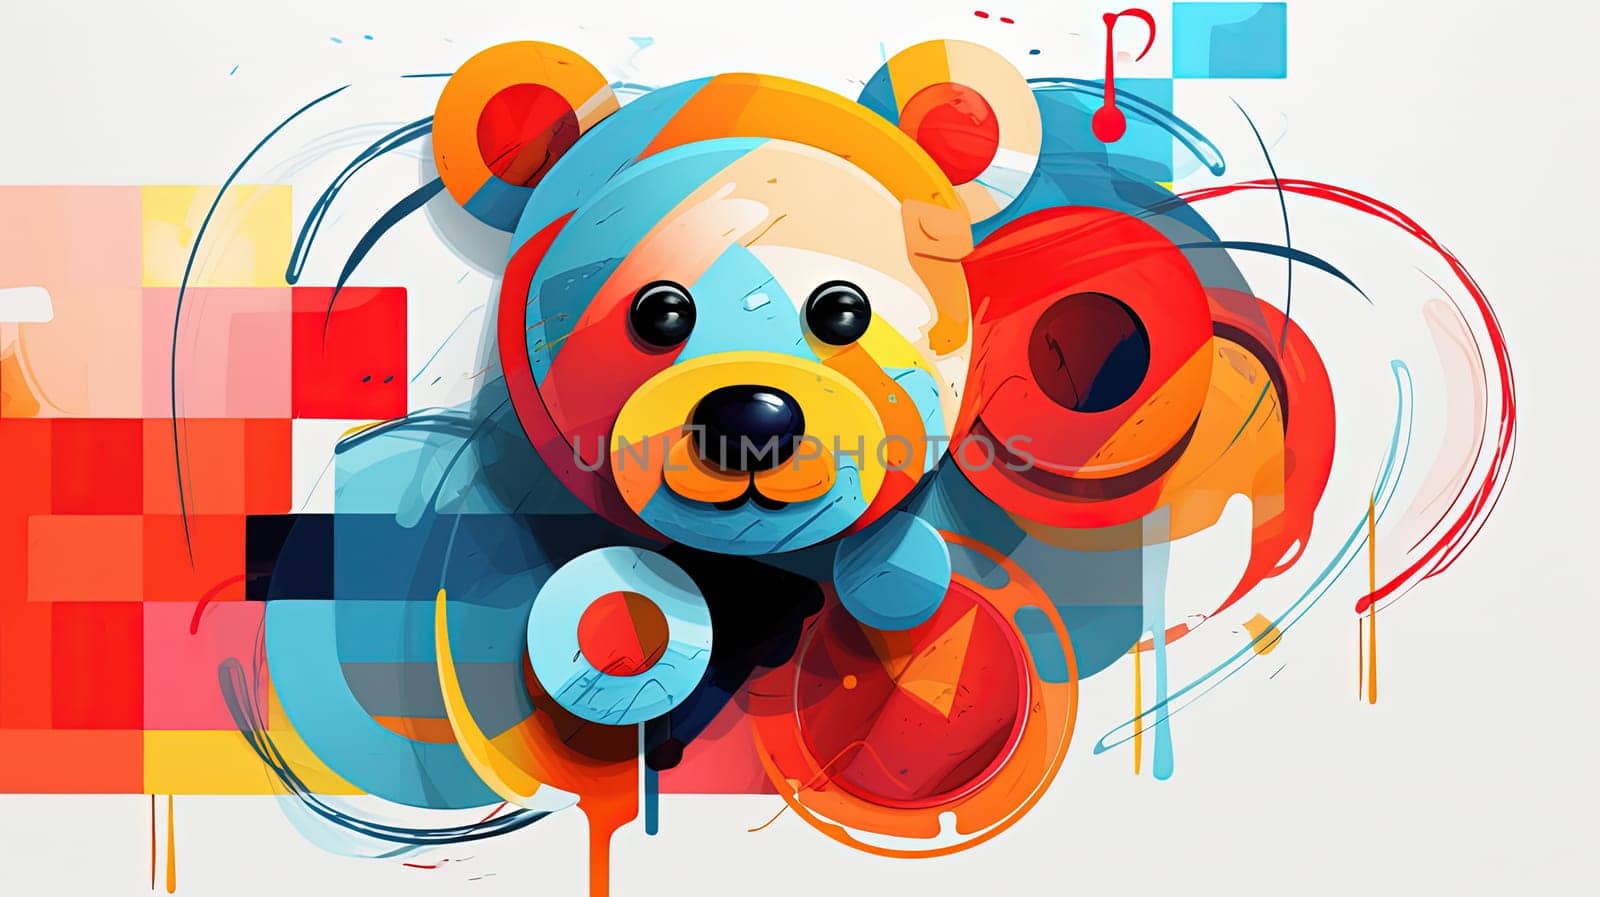 An intriguing abstract illustration of a teddy bear by Kadula